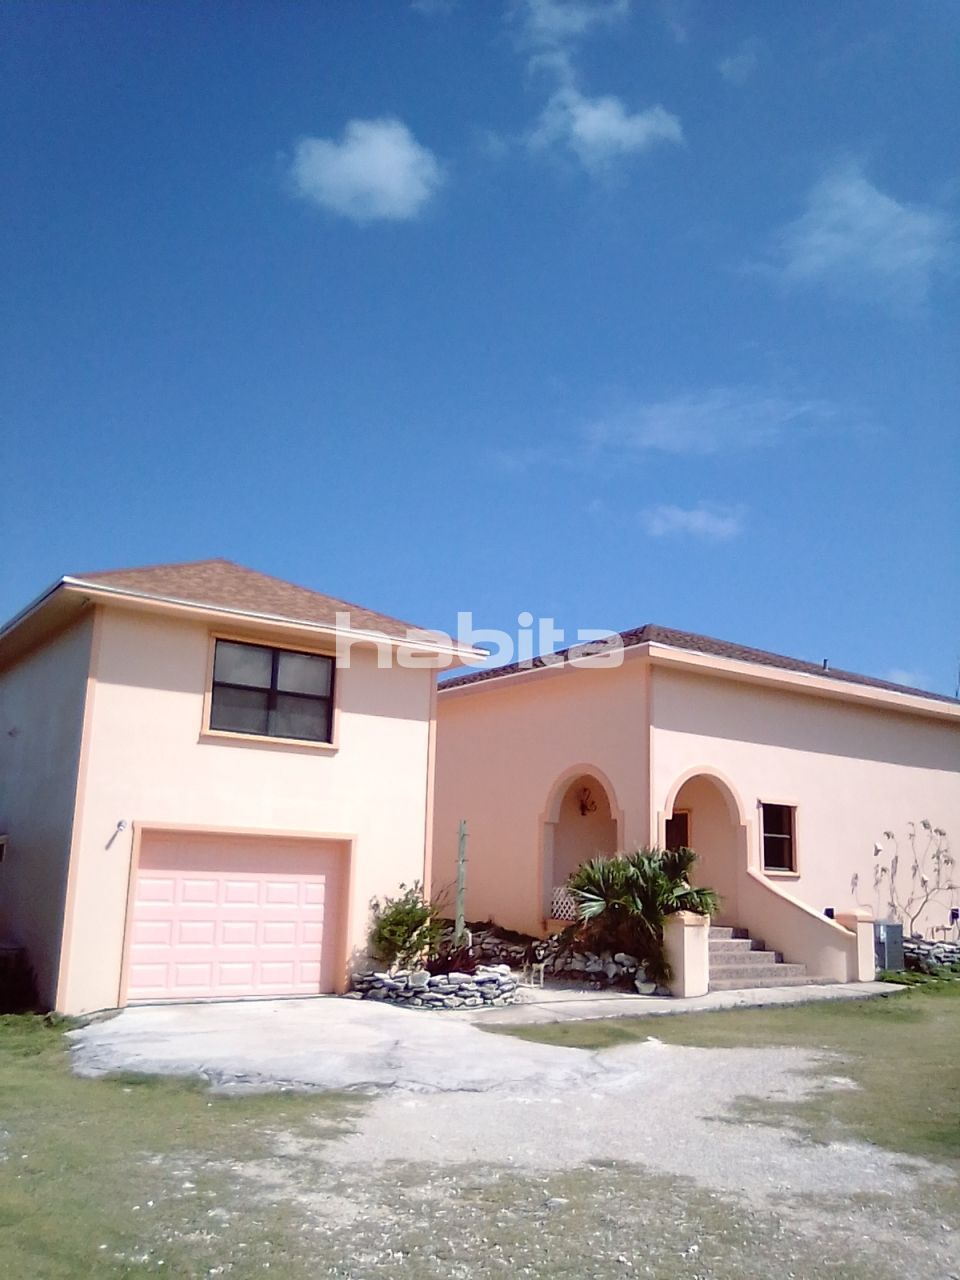 Flat on Abaco Islands, The Bahamas, 193 sq.m - picture 1